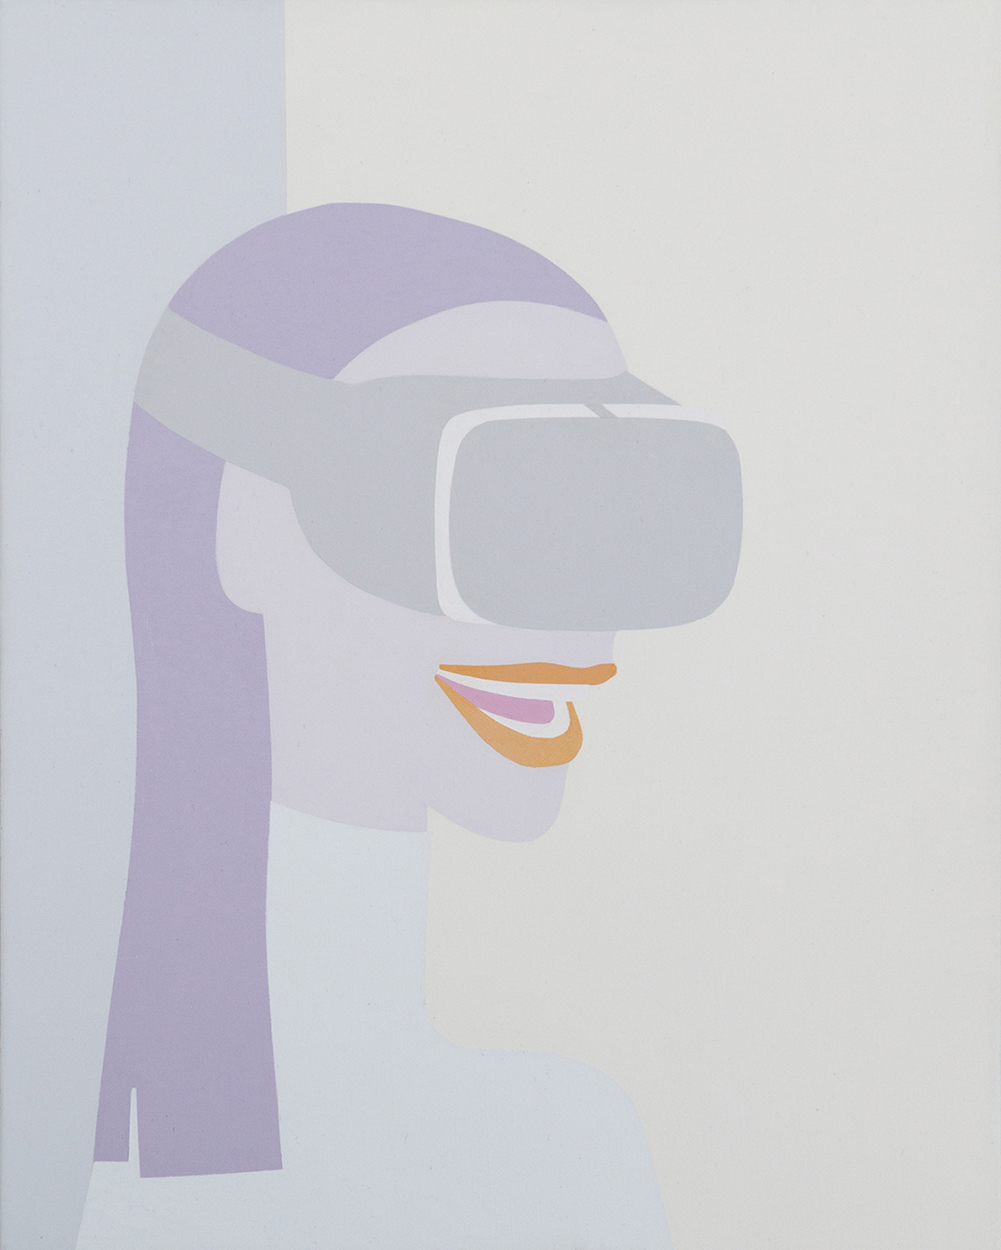   Girl Watching VR,   2018,    New Tech Girls series  ,  acrylic on canvas,   20 x 16 in / 50,8 x 40,6 cm  016-ntg   